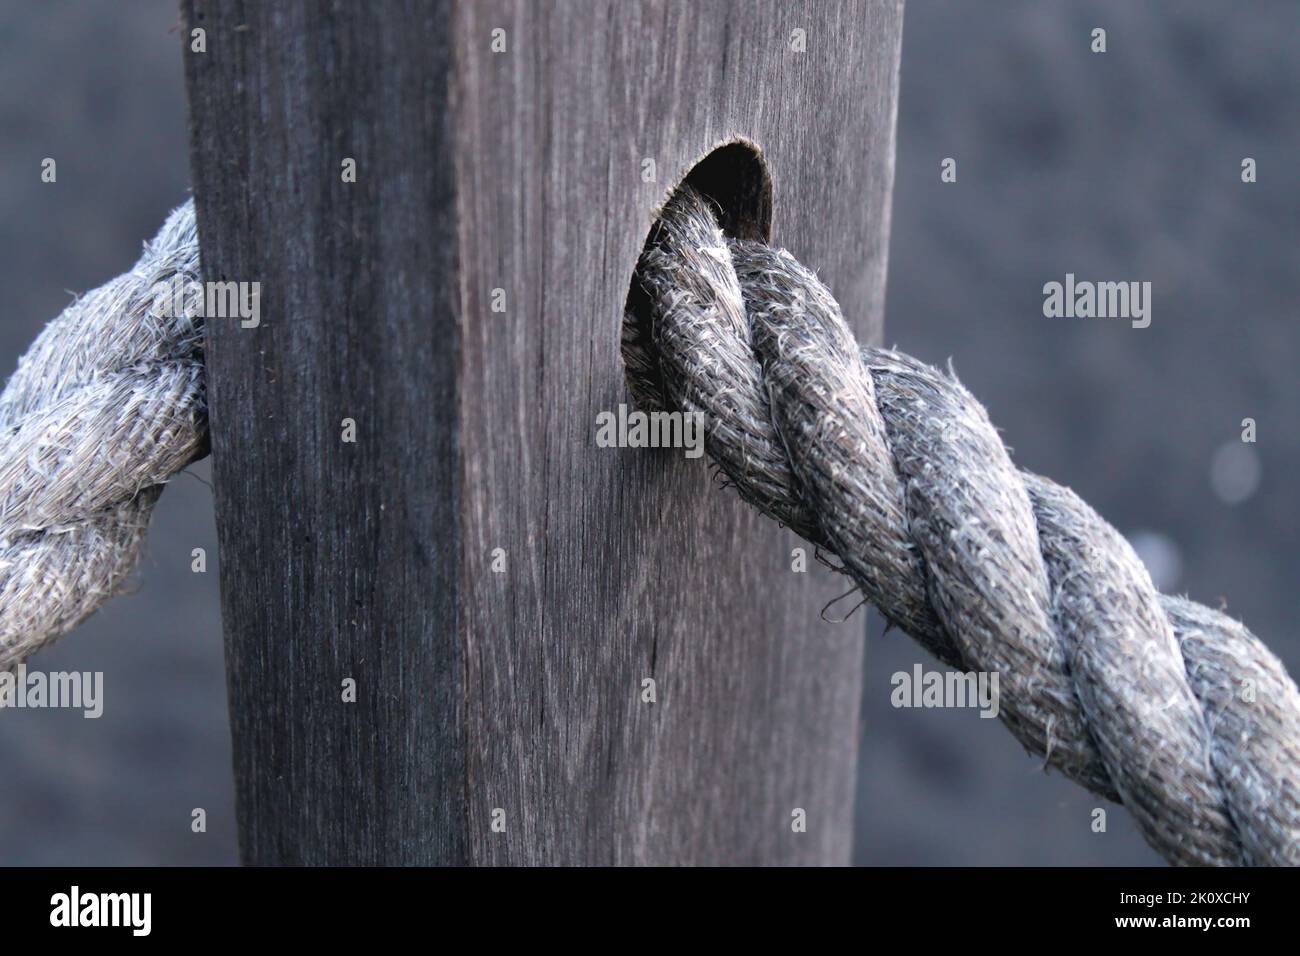 Closeup of outdoor wooden fence with rope connection as a link. Teamwork and strong relationship concepts. Stock Photo